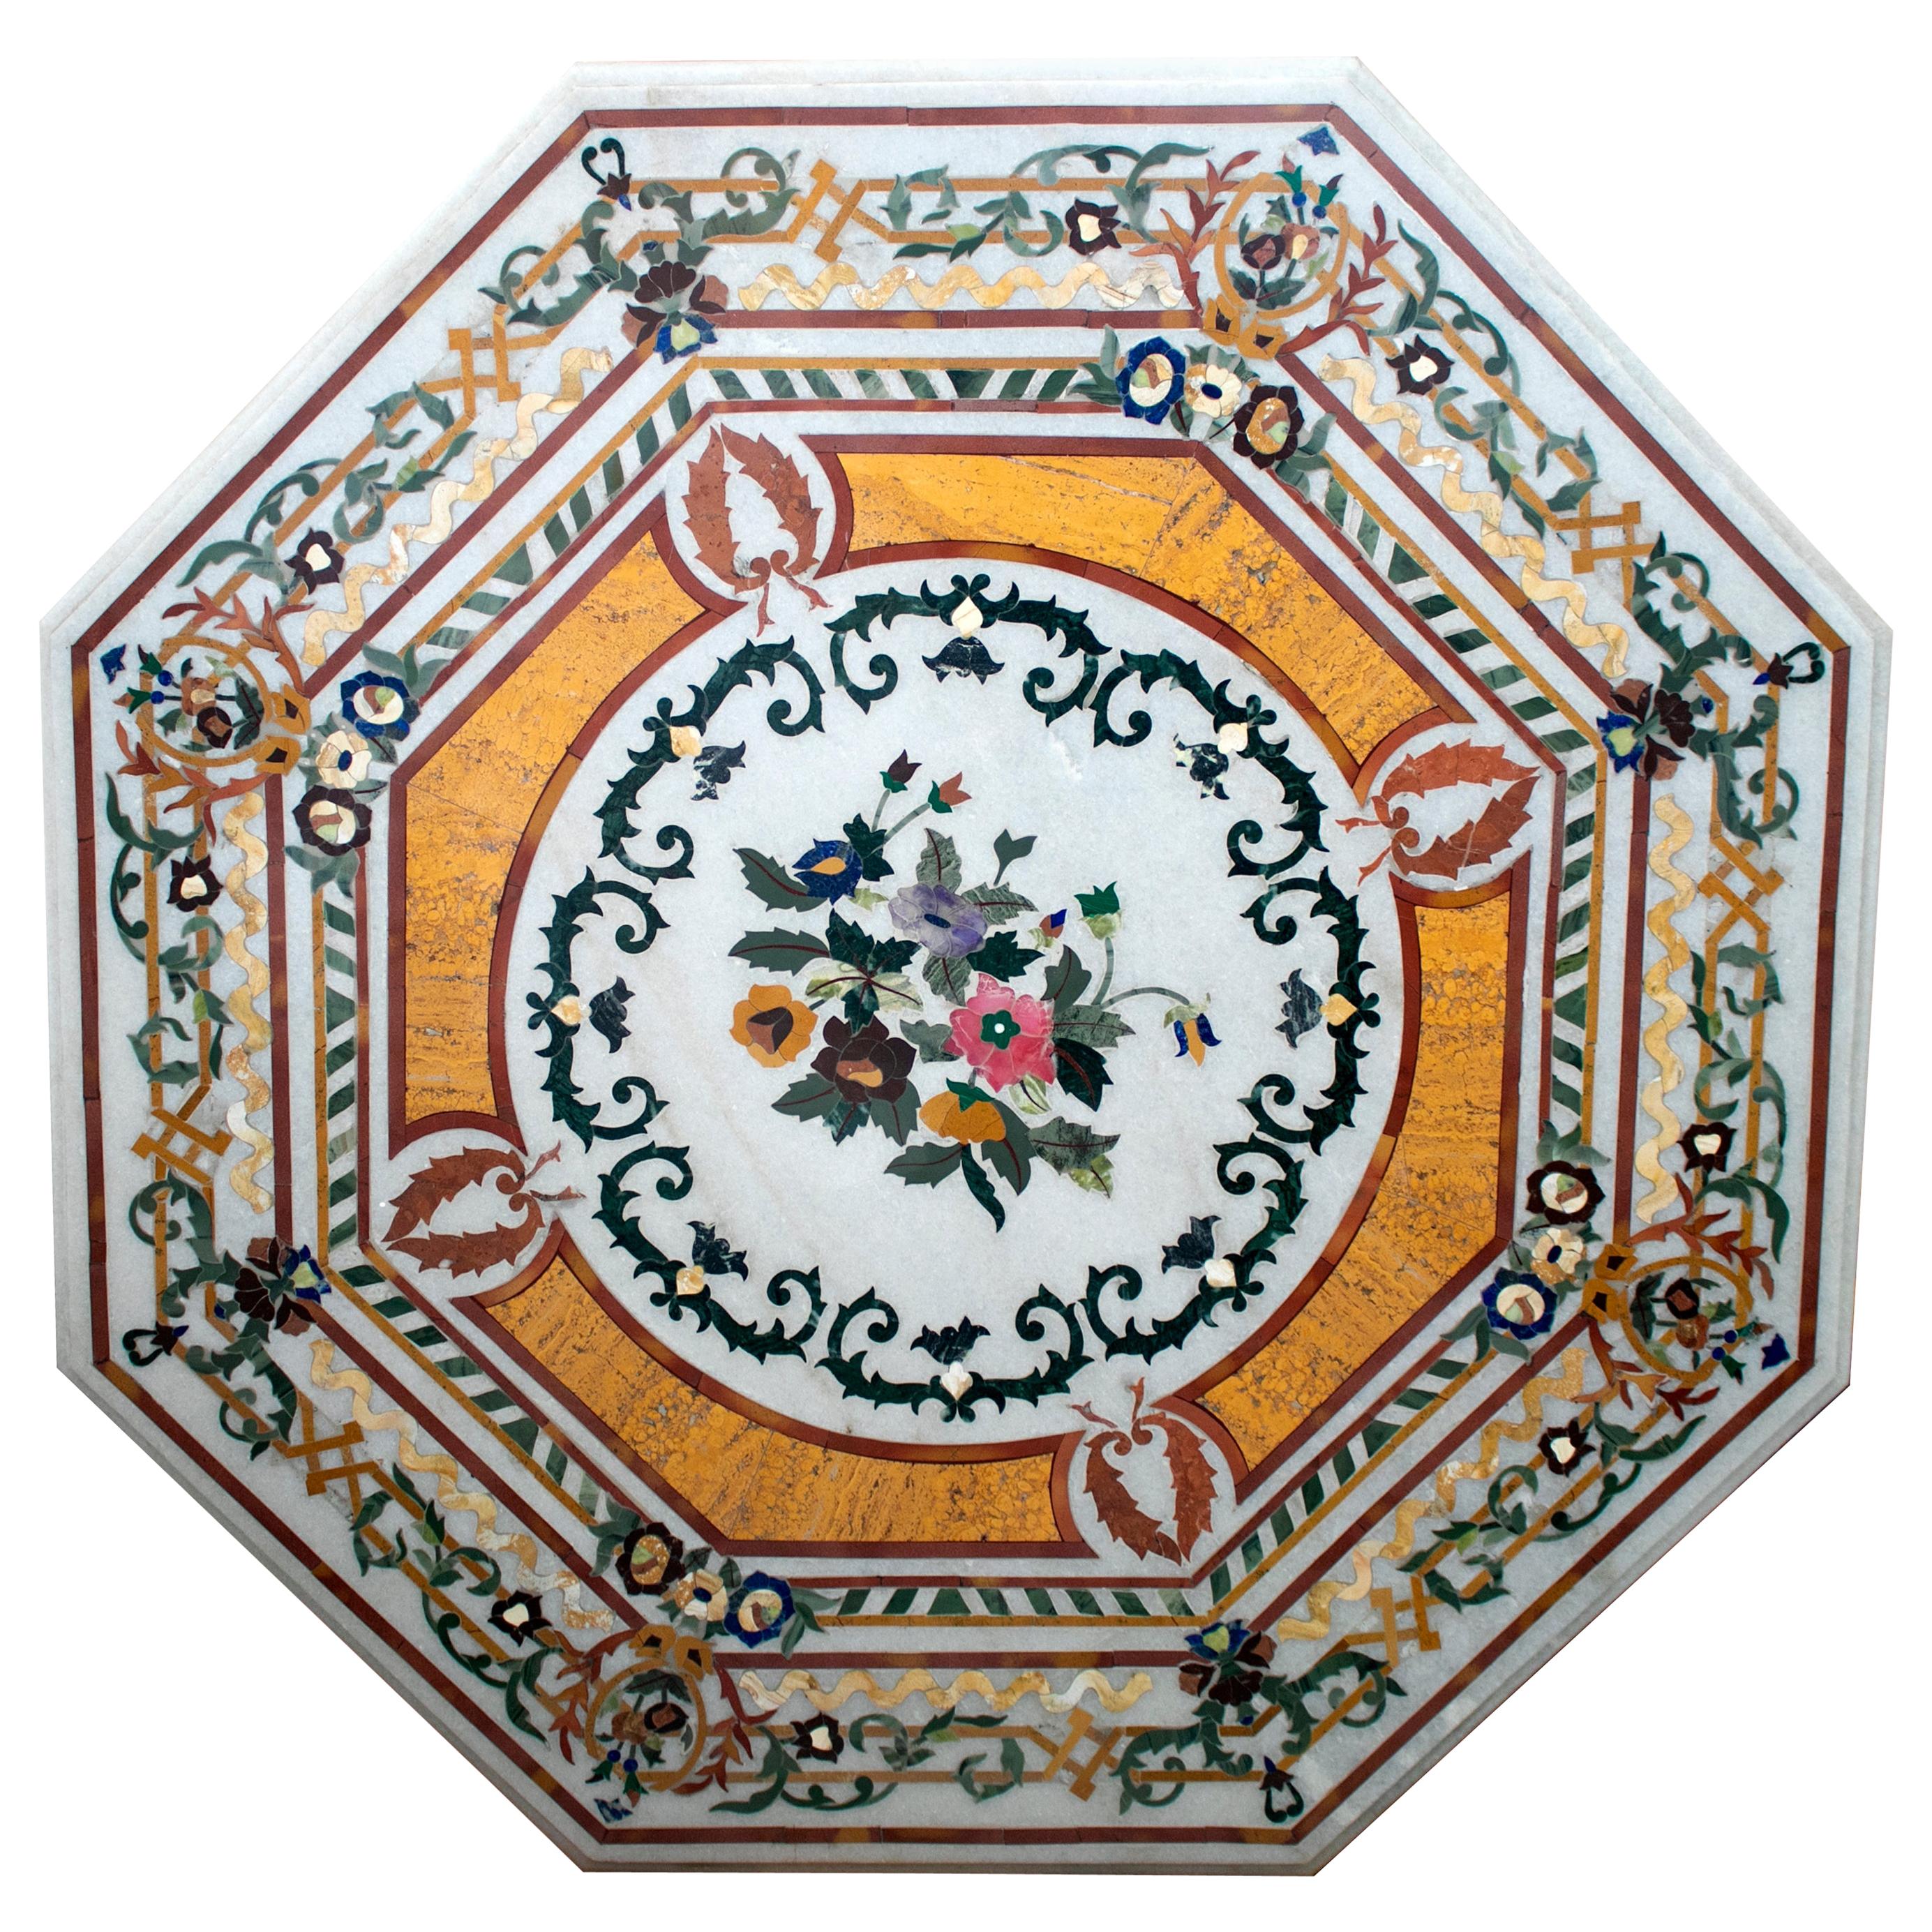 Octagonal Pietre Dure Marble Inlay Mosaic Table Top with Lapis and Jade